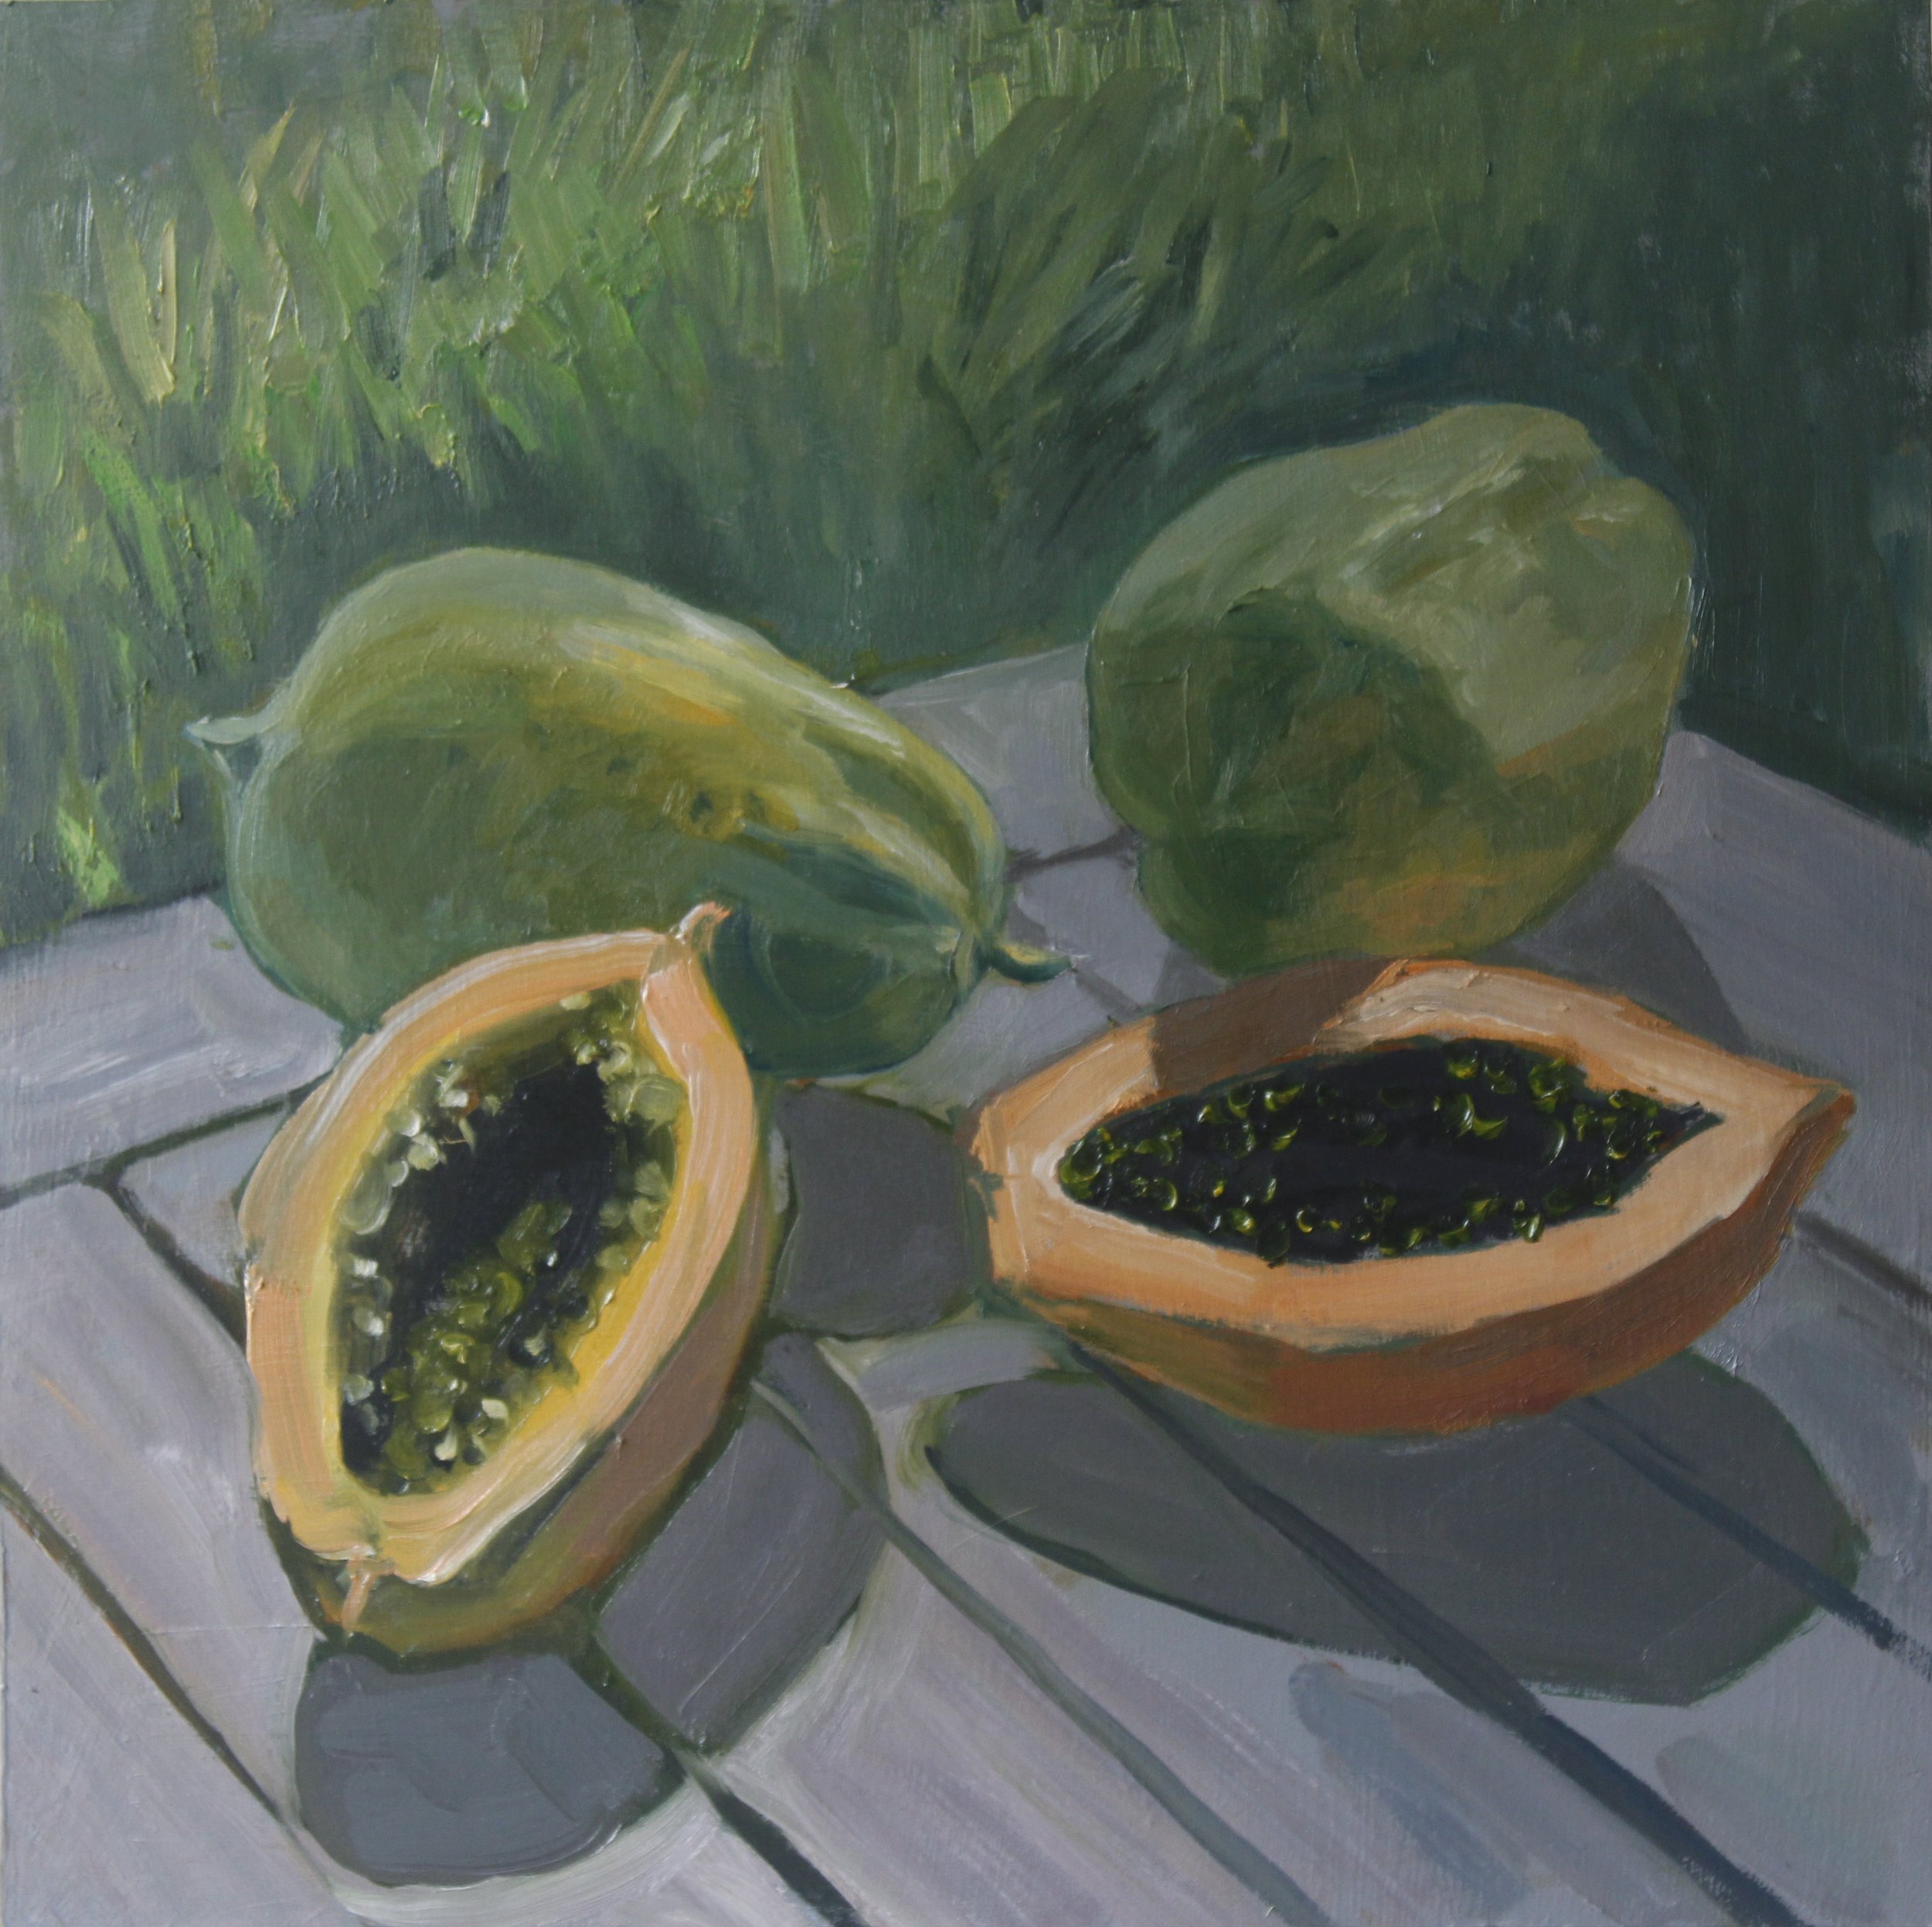 Papaya, 2022, Oil on board, 12x12 inches. Private Collection.